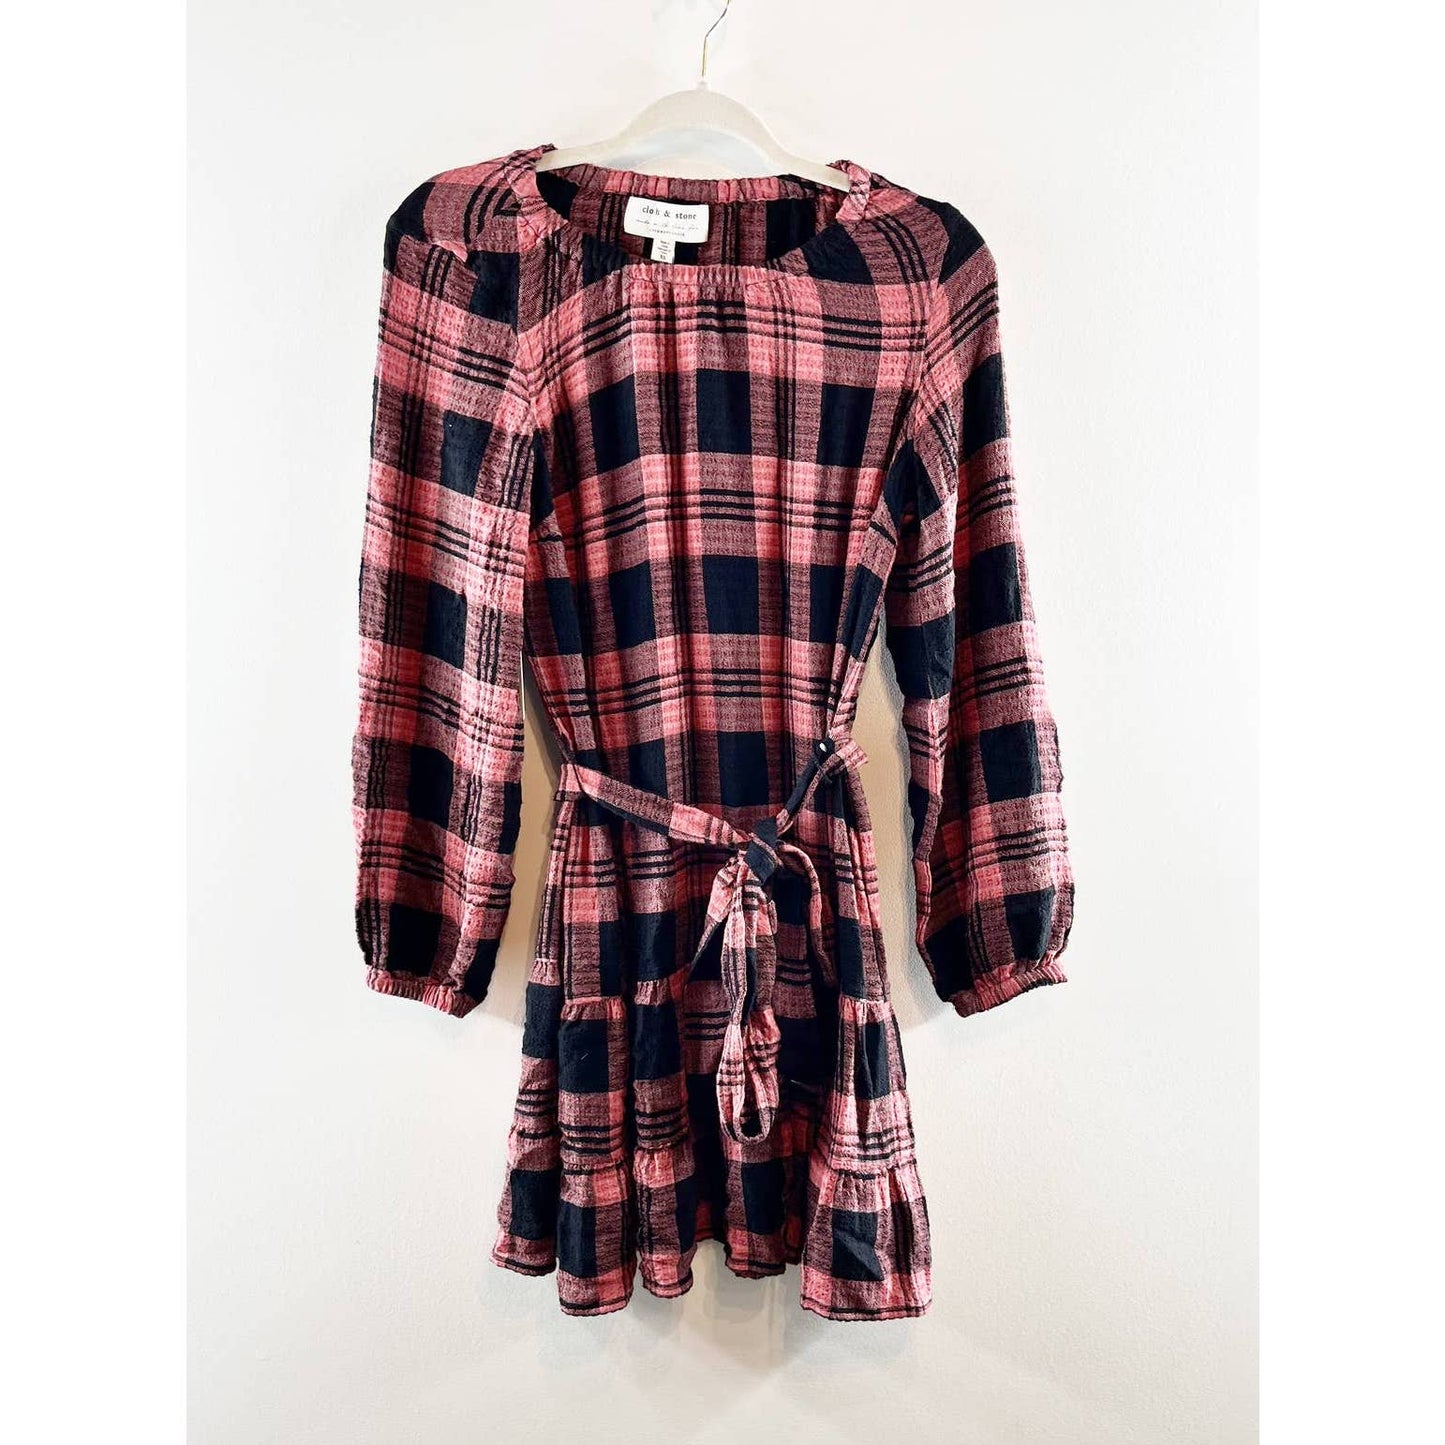 Anthropologie Cloth & Stone Long Sleeve Plaid Belted Mini Dress Pink Black XS